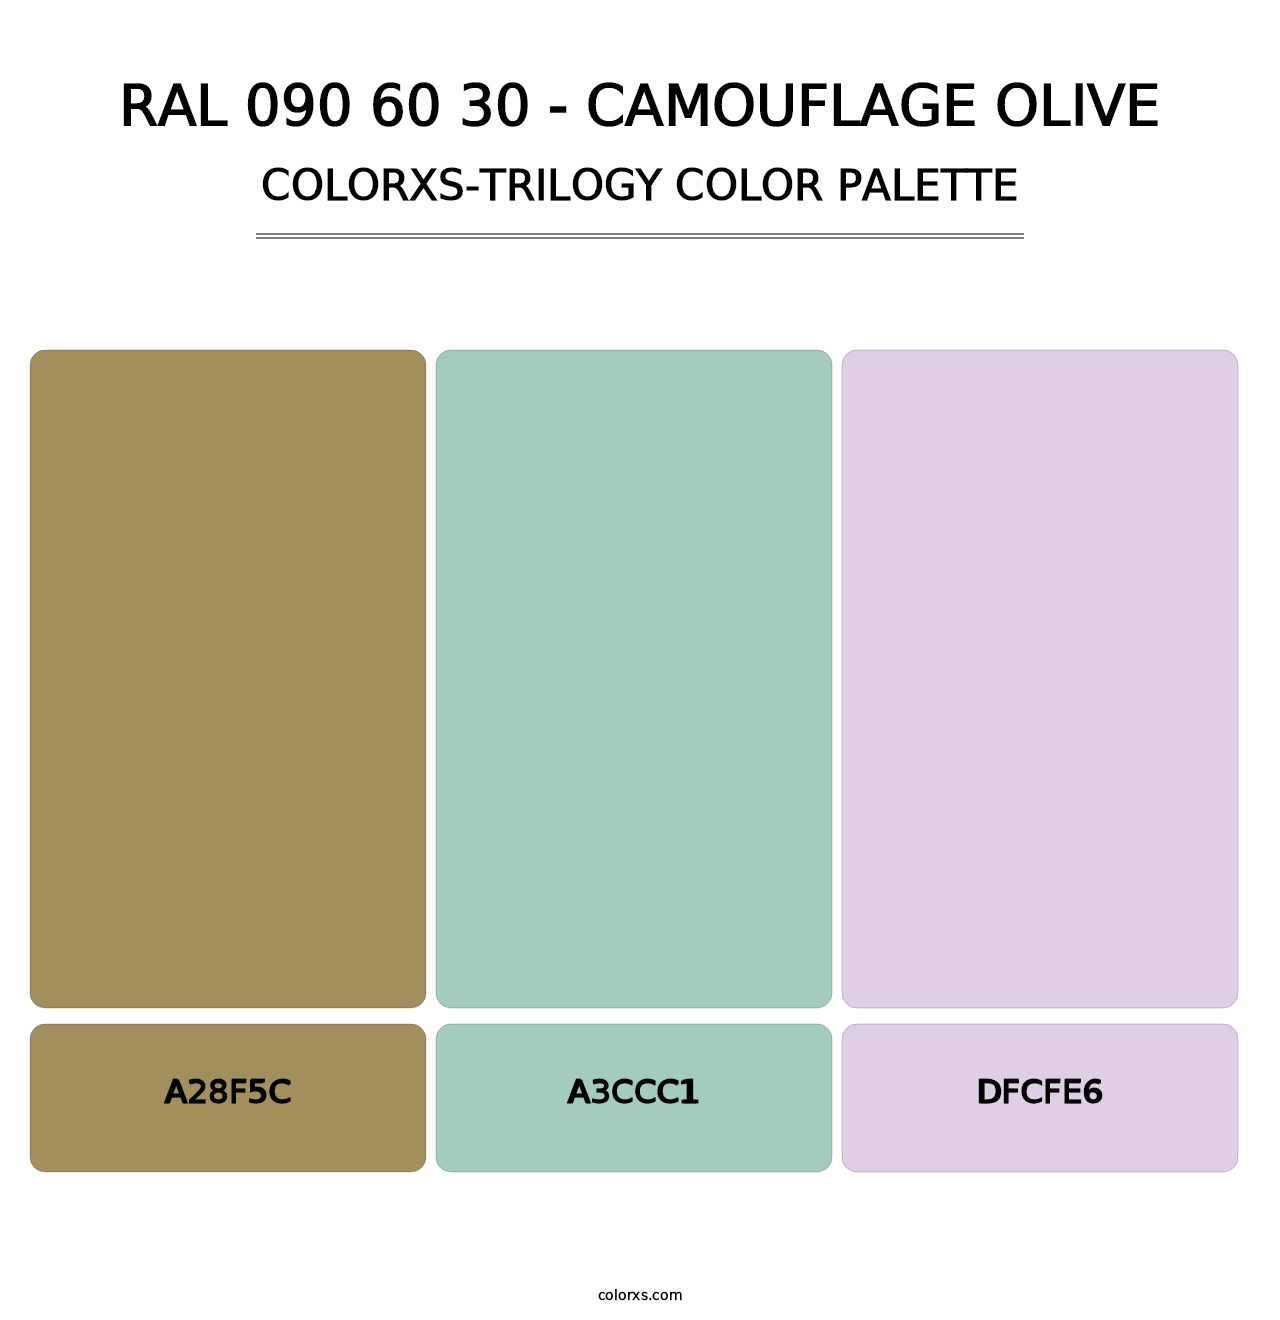 RAL 090 60 30 - Camouflage Olive - Colorxs Trilogy Palette